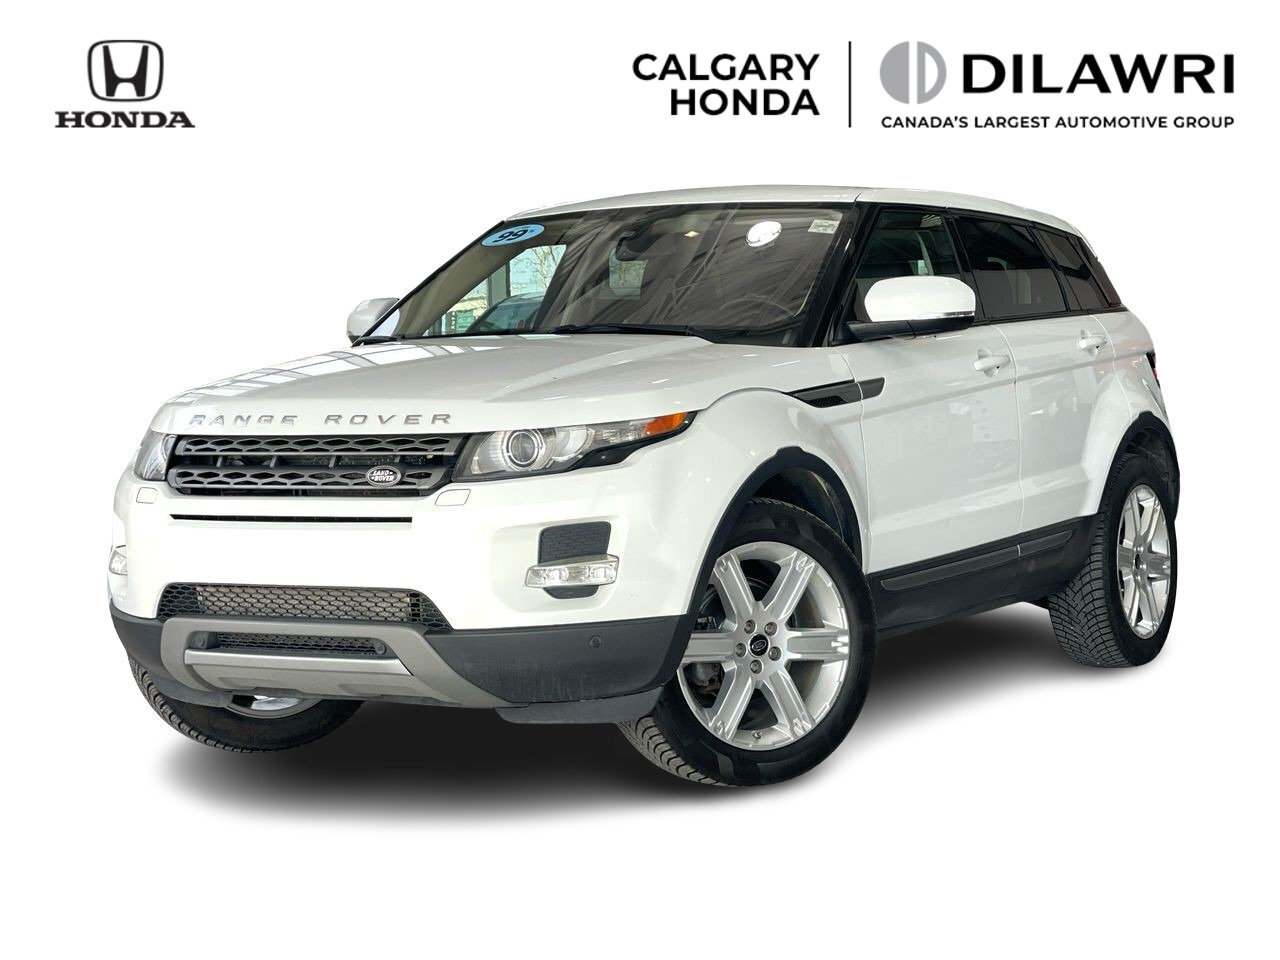 2013 Land Rover Range Rover Evoque Pure Leather Seats/Heated Seats/Backup Camera / 